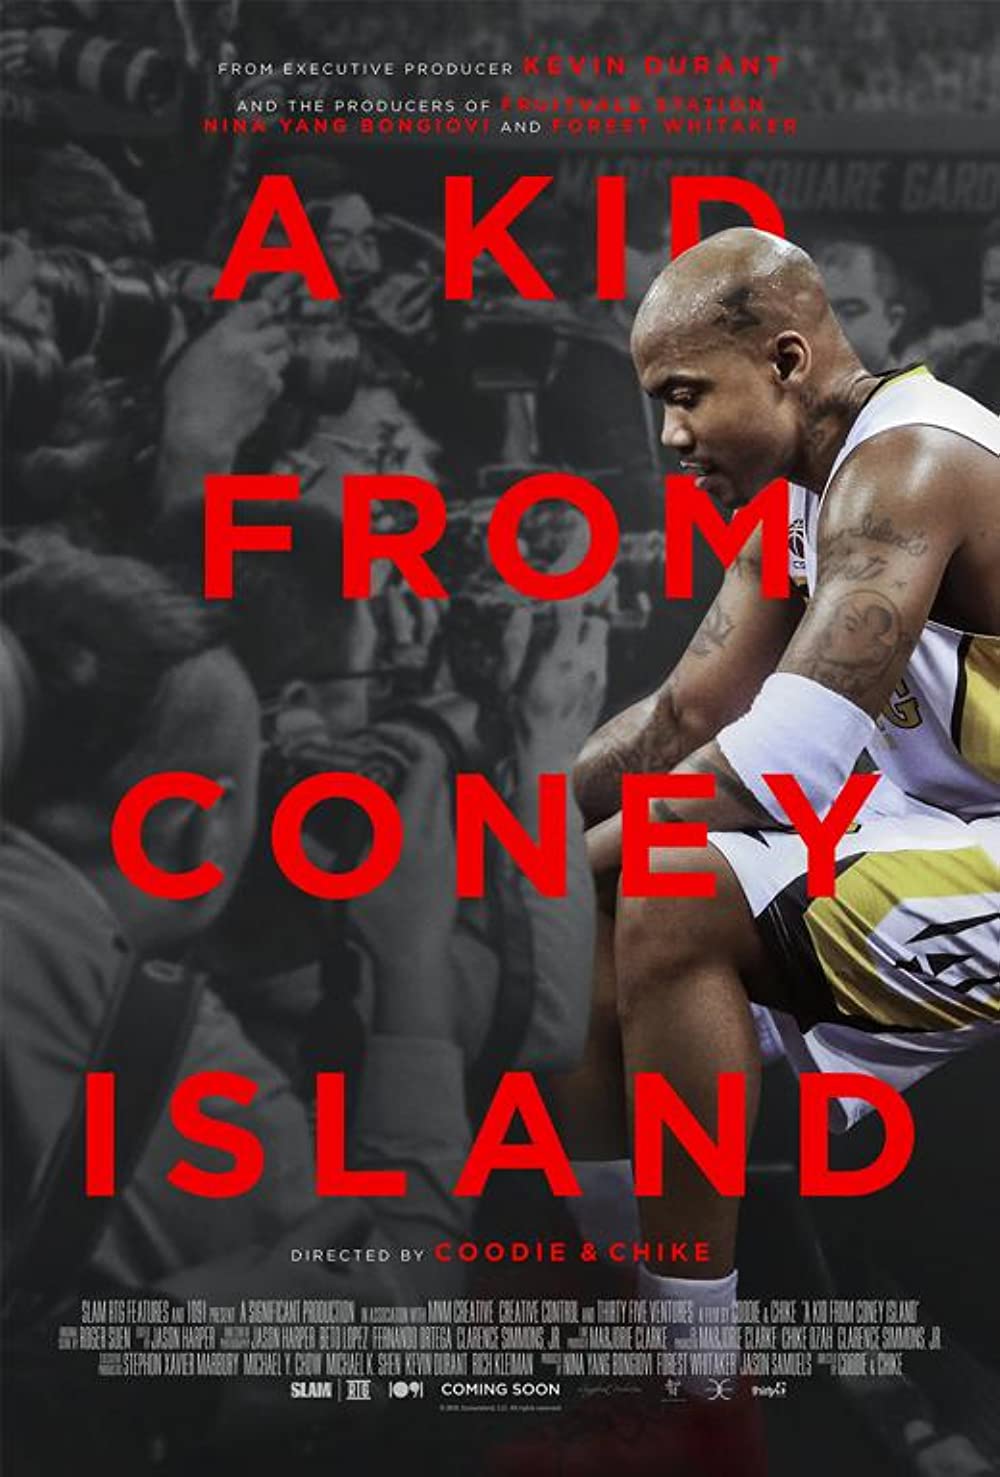 A kid from coney island documentary cover